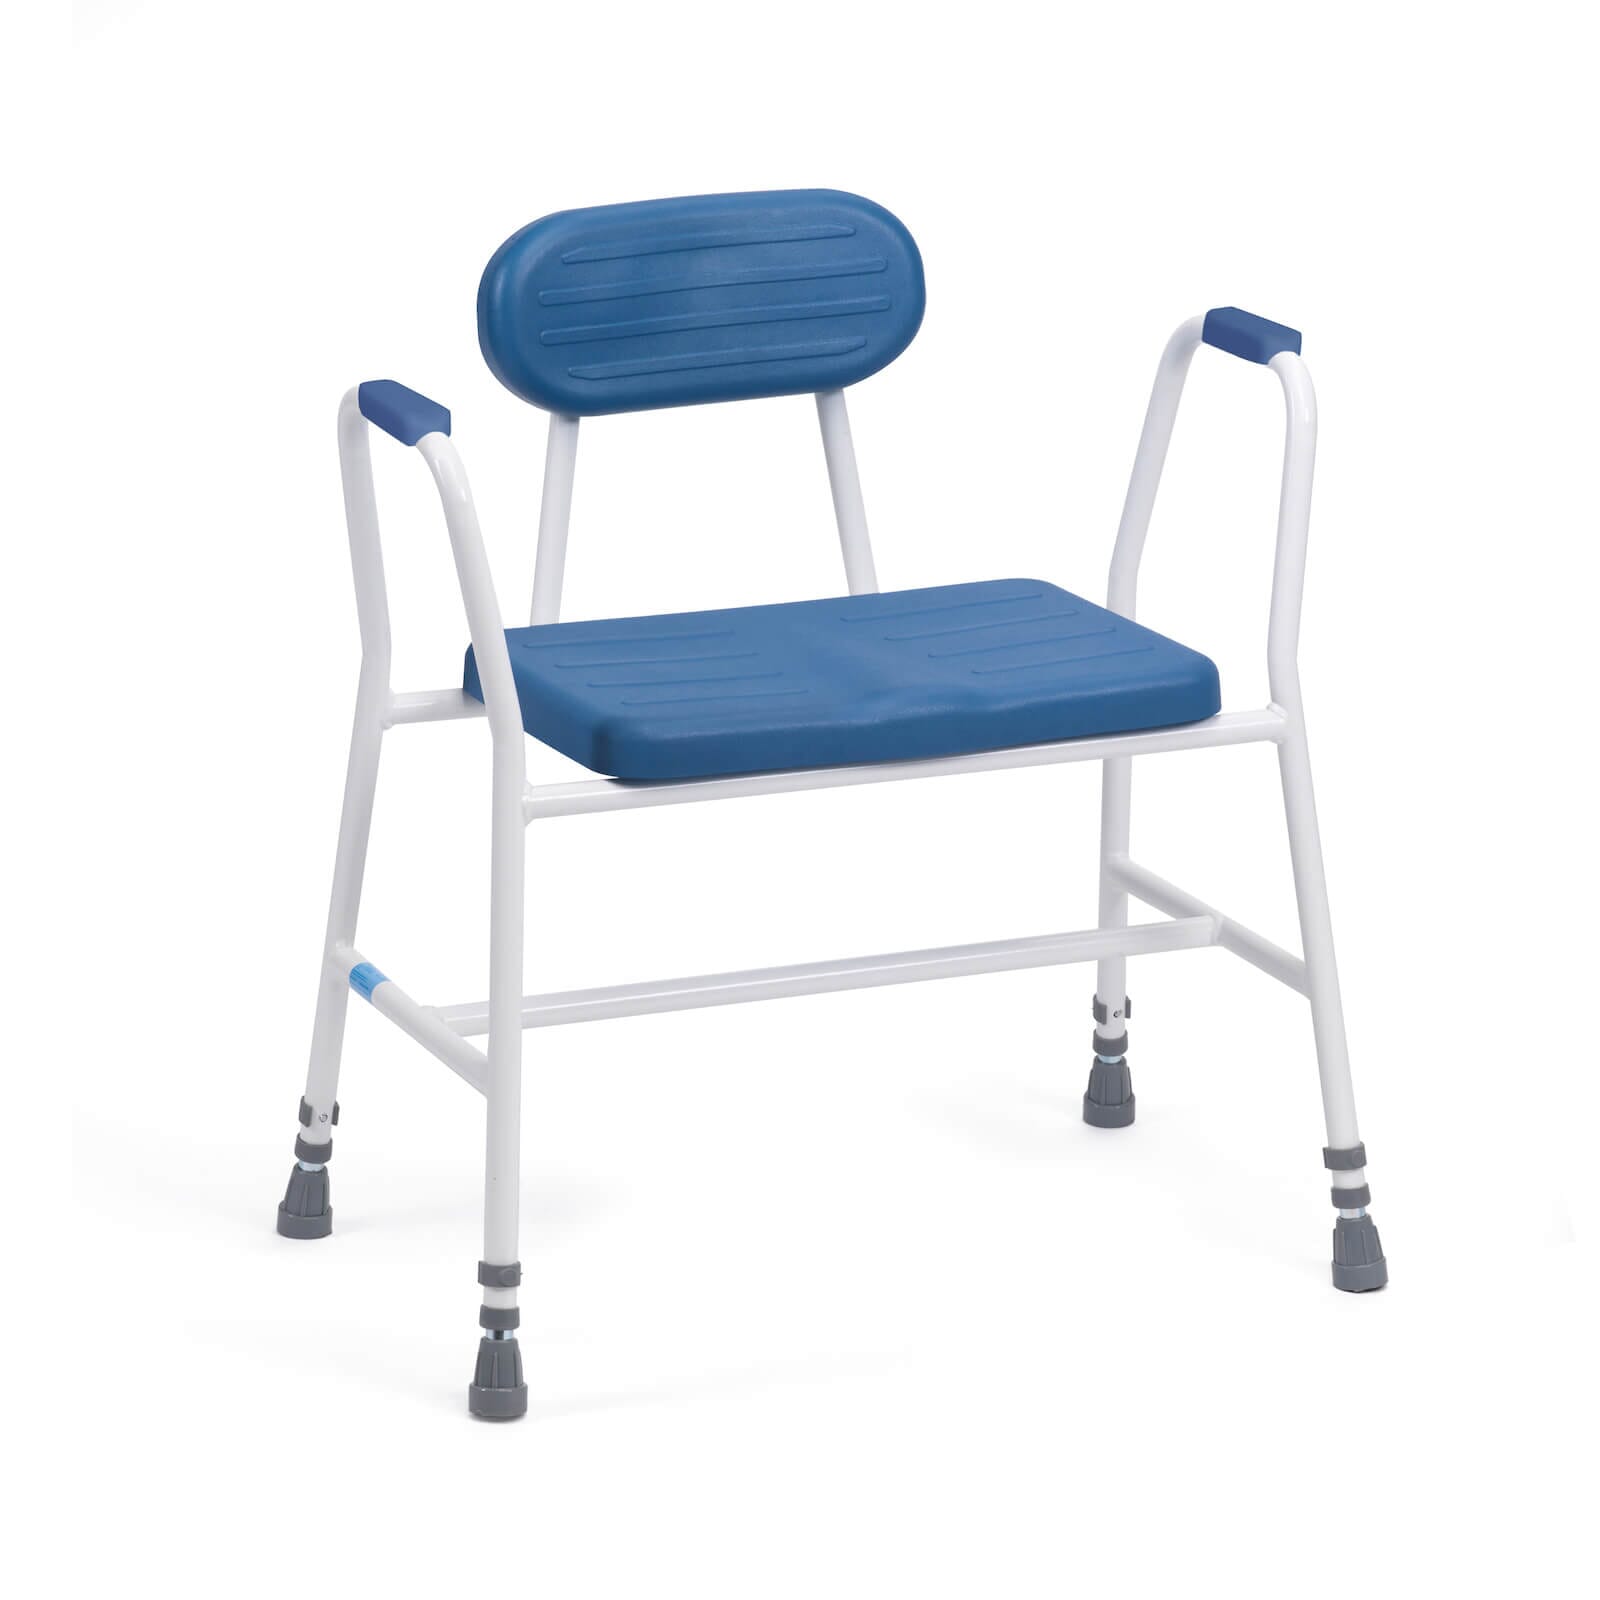 View PU Bariatric Perching Kitchen Stool Padded Back Steel Arms with Arm Pads information